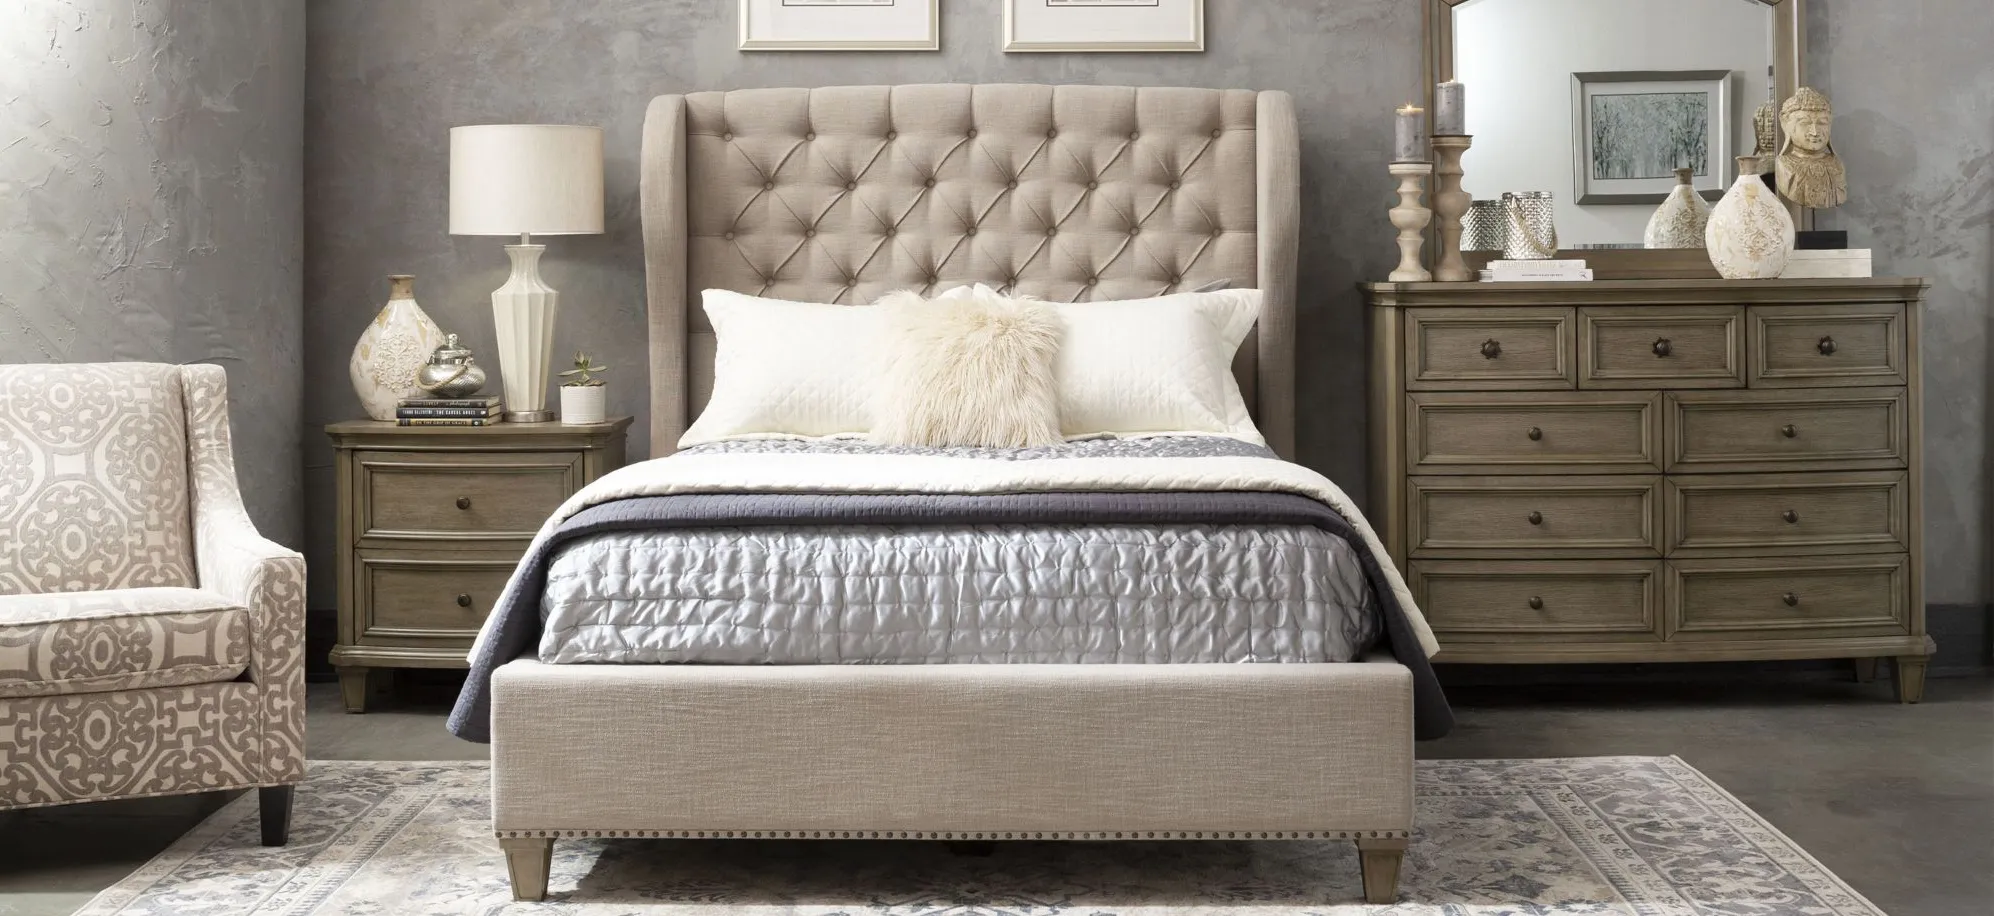 Lorient 4-pc. Bedroom Set in Gray Cashmere by Homelegance